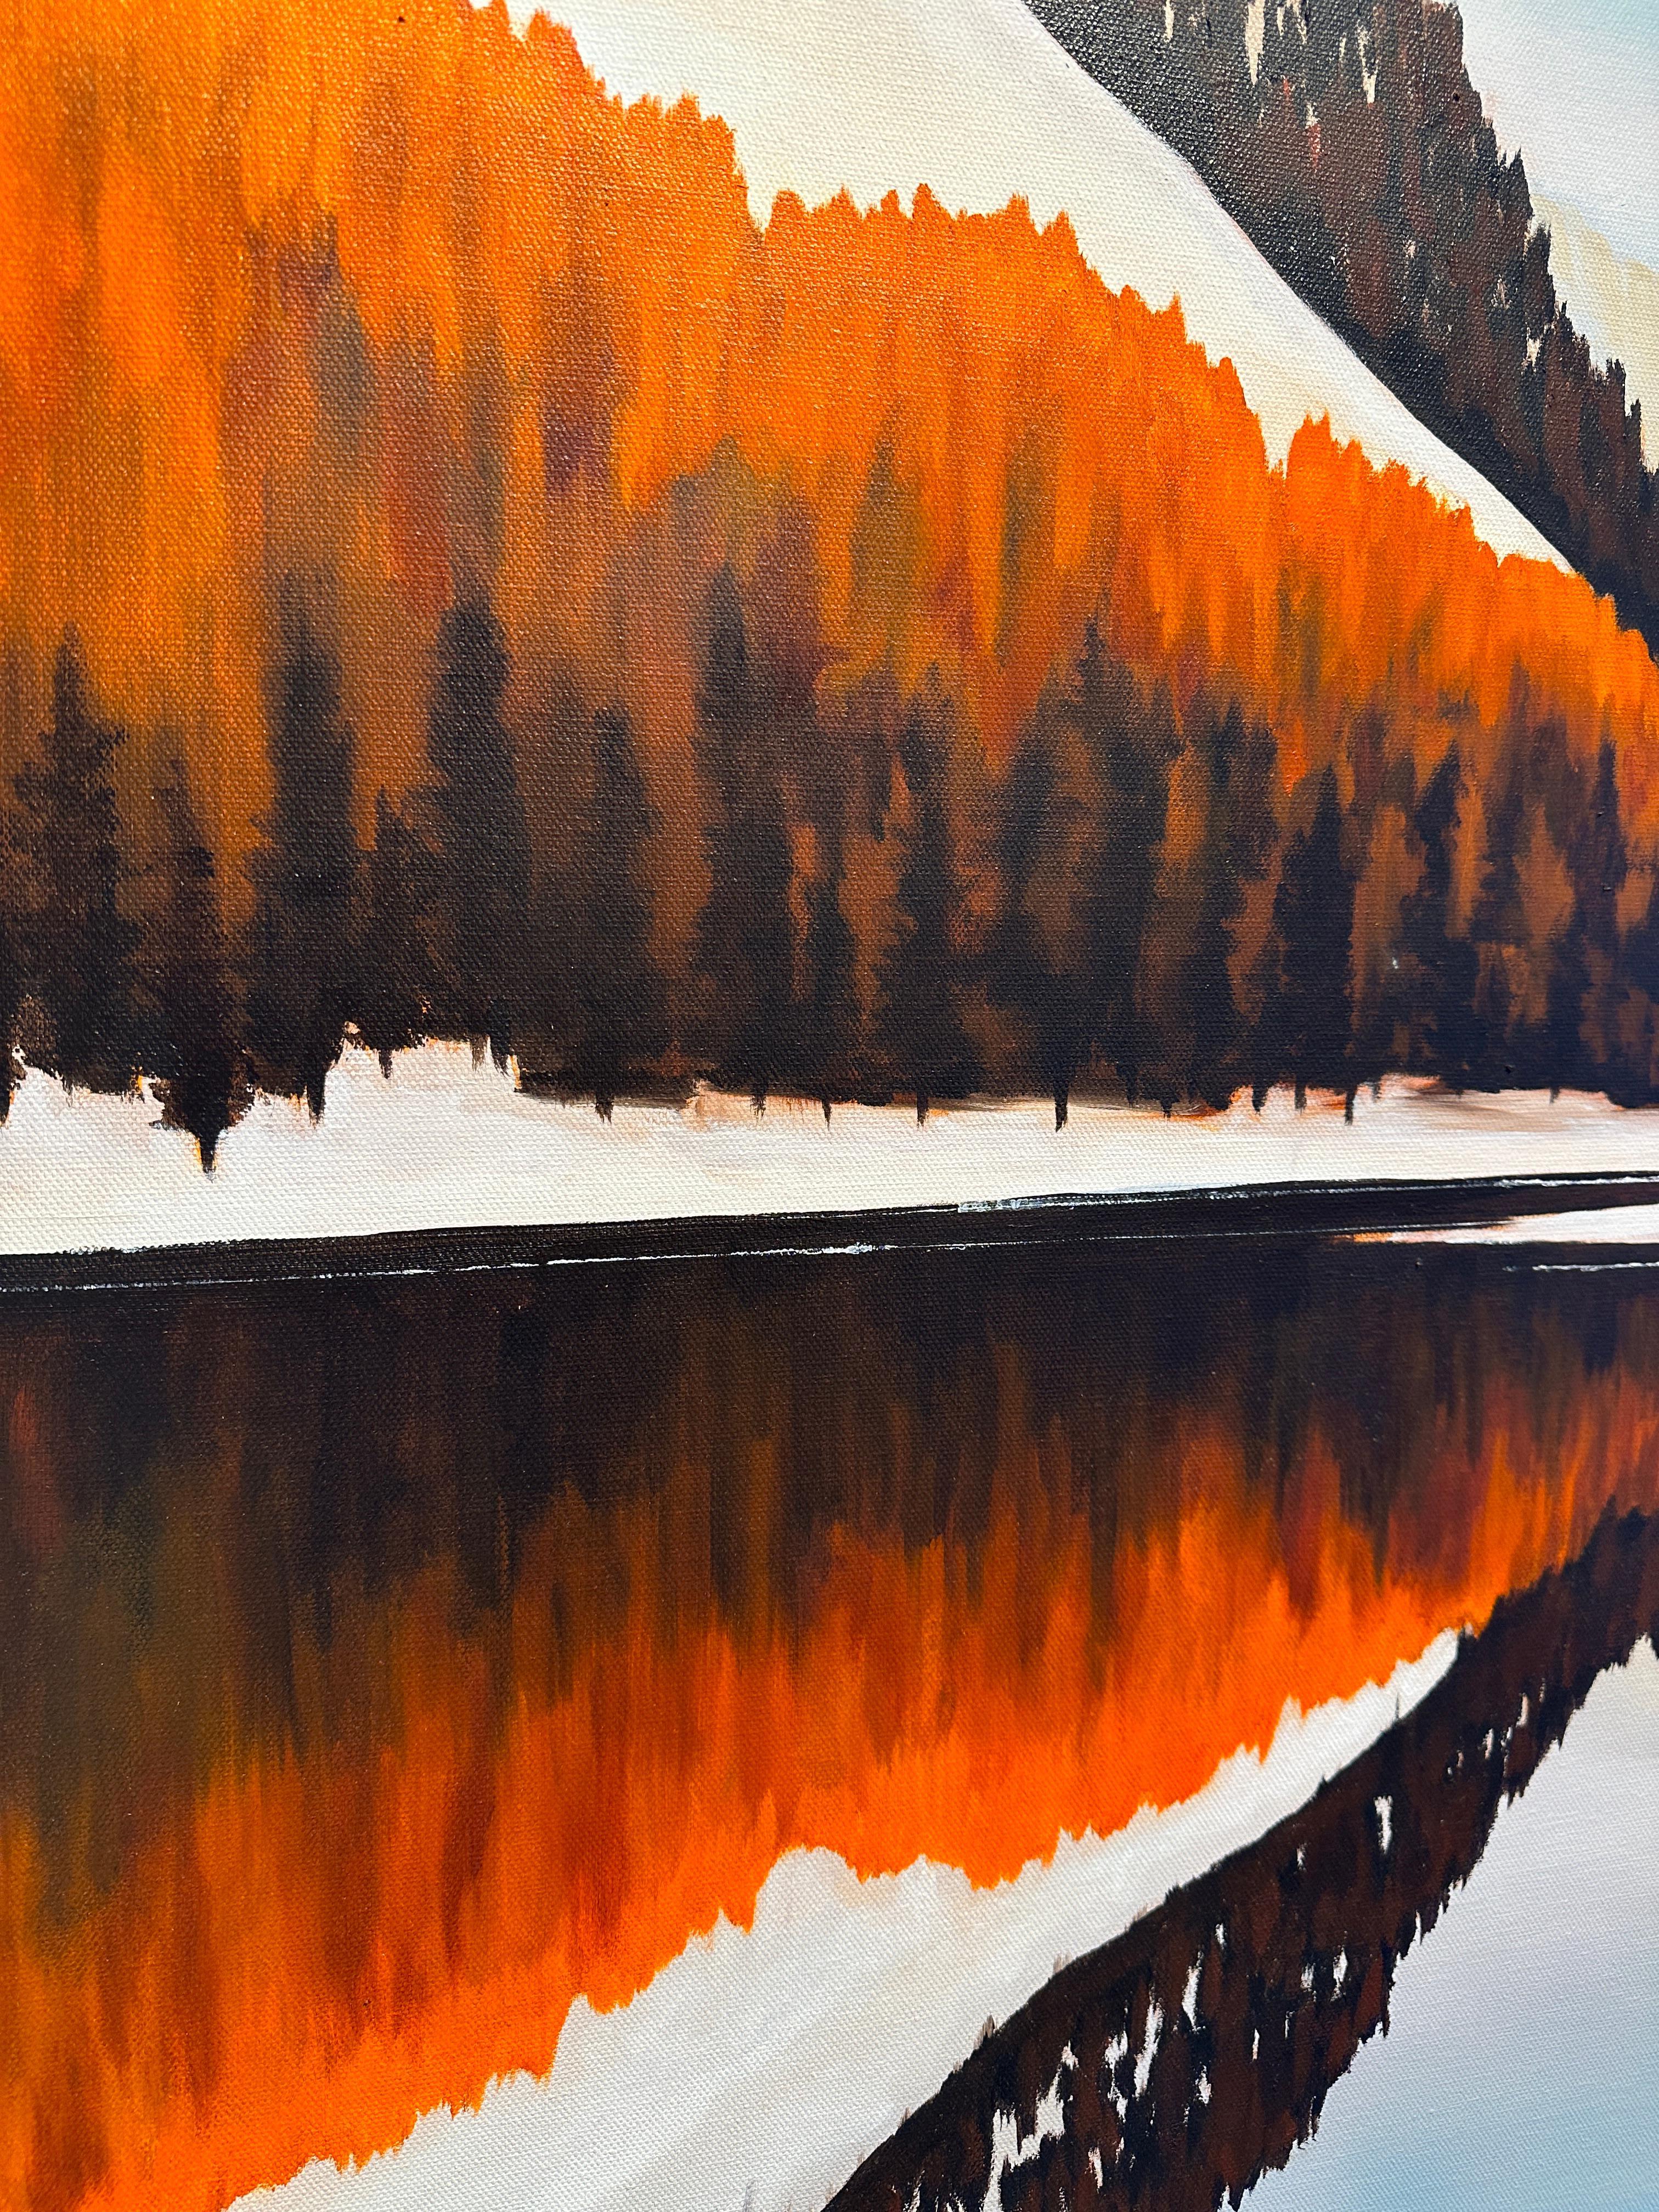 Gold, yellow, marigold, burnt umber, sienna, brown, blue, mountain, lake, trees
Inspired by the drama of nature and light, Cynthia creates abstracted landscapes with oil on canvas. 